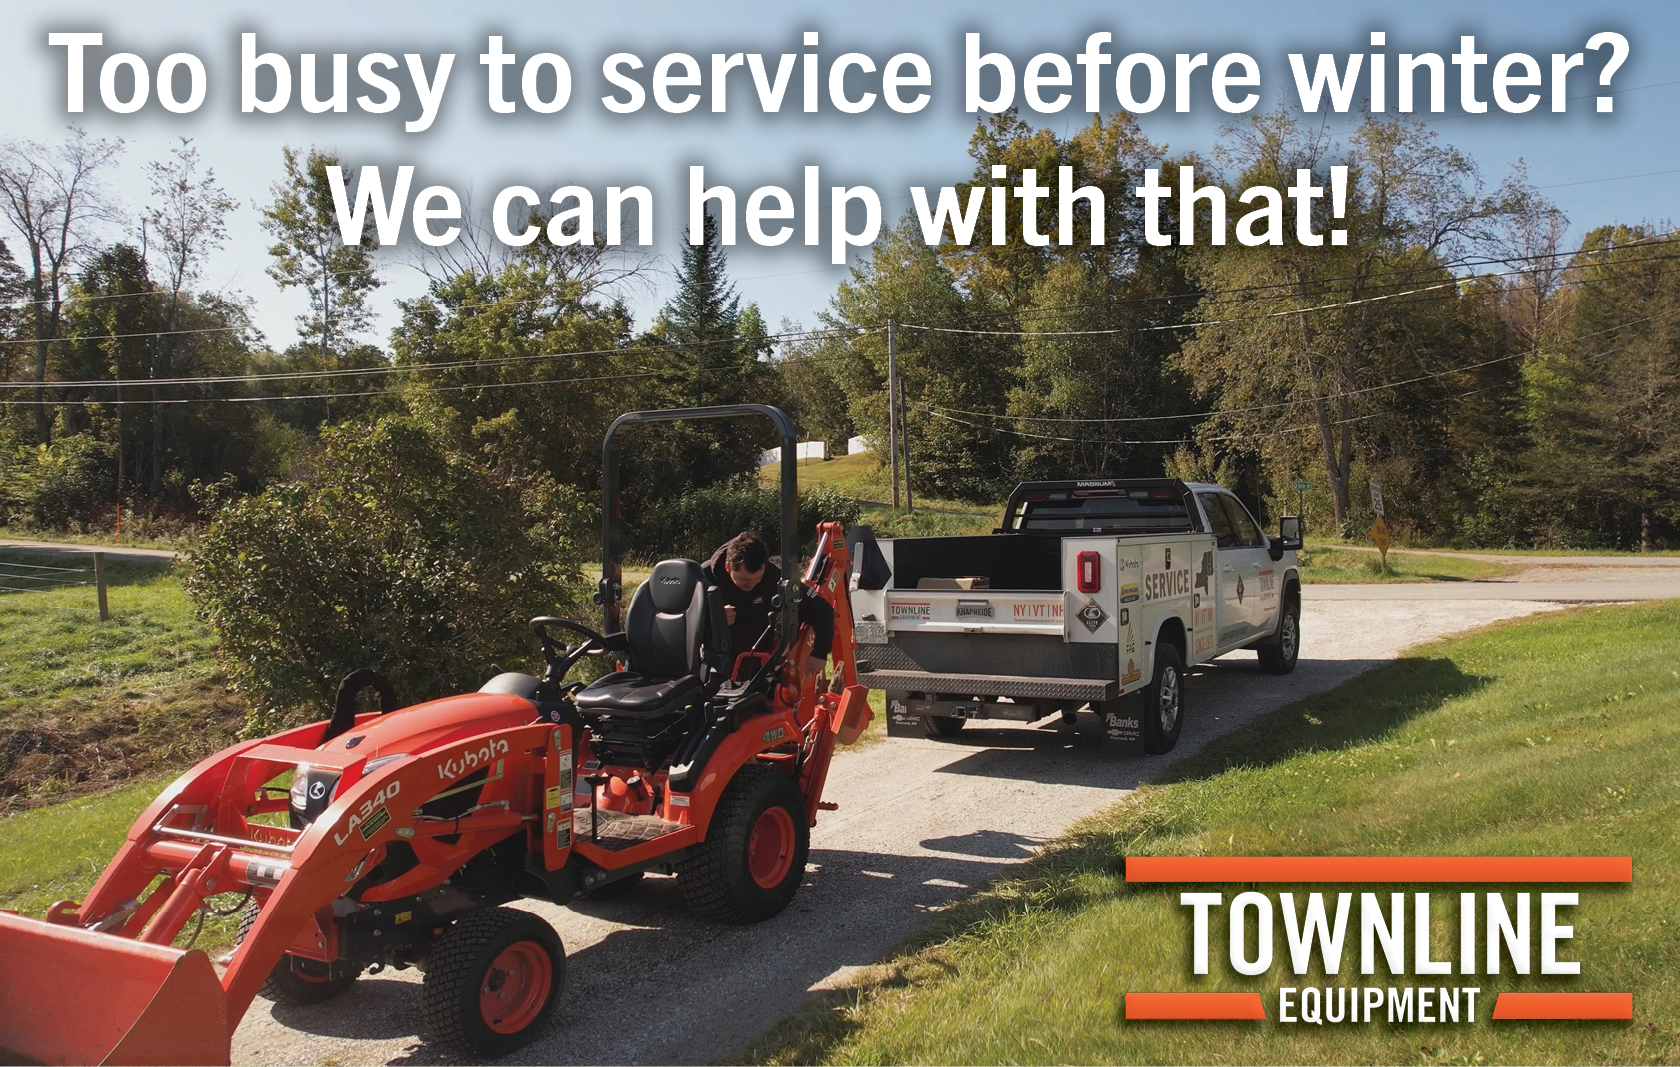 Running out of time or too busy for servicing your equipment?